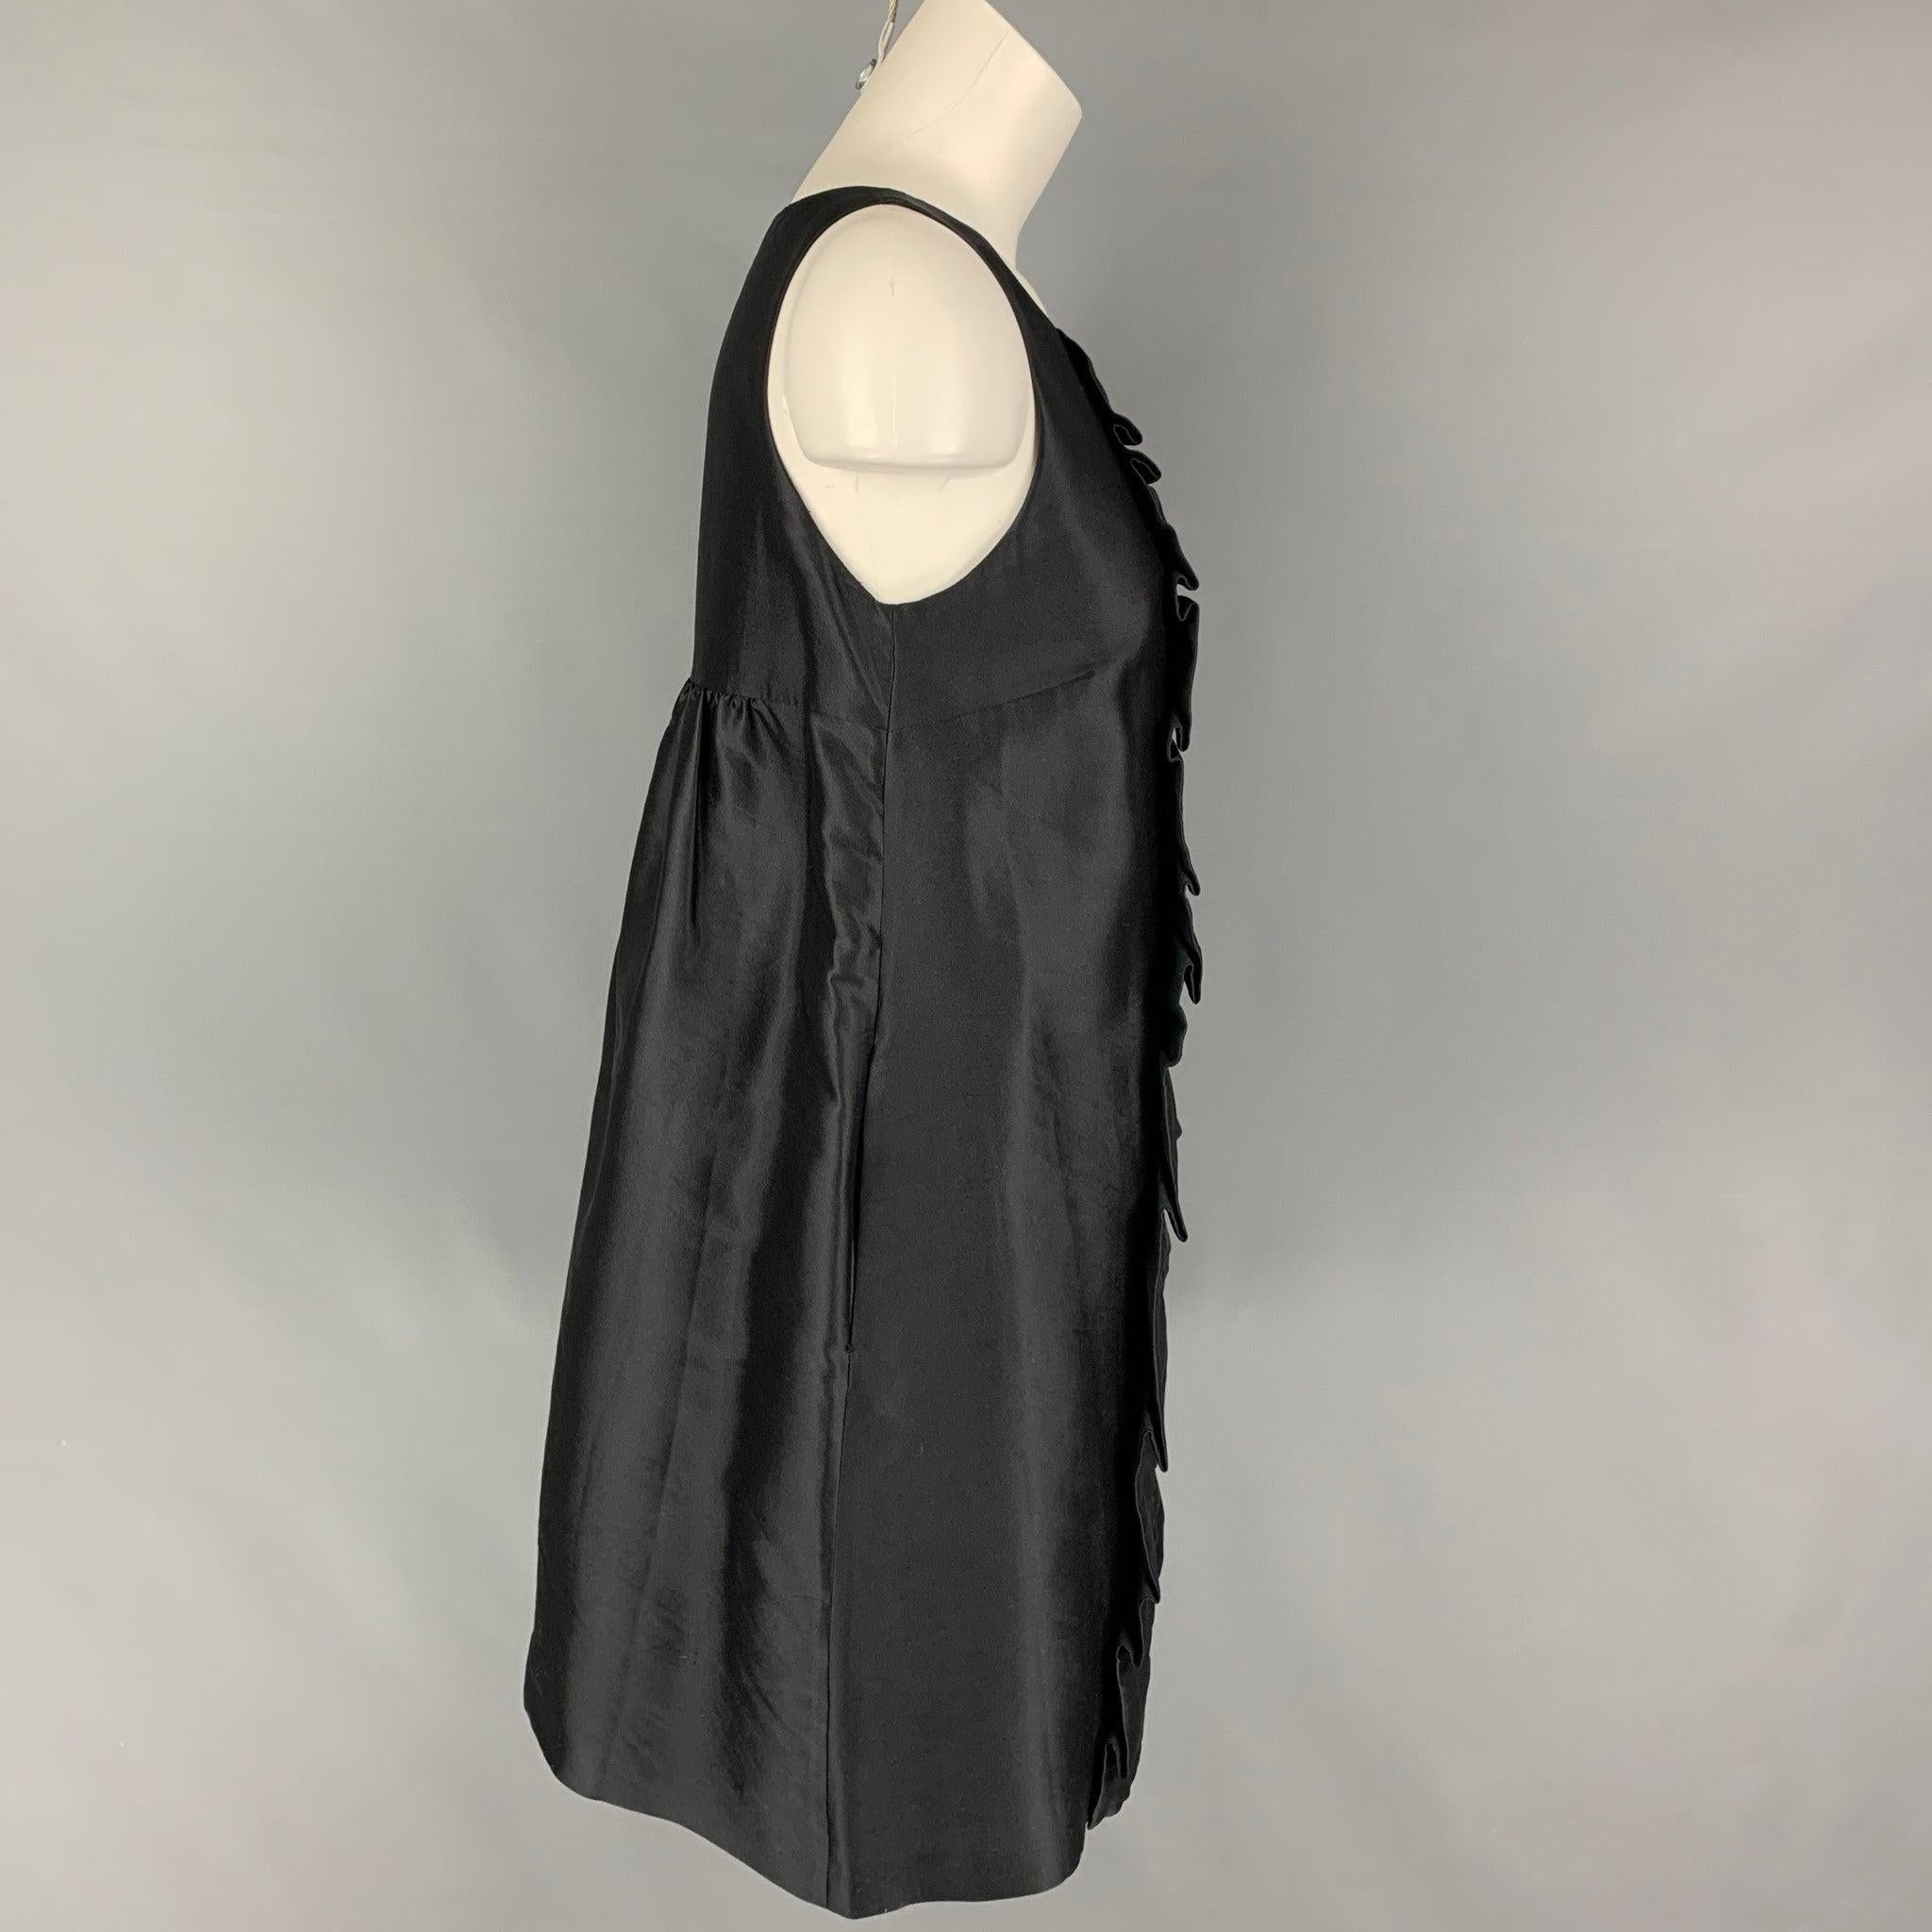 CHEAP and CHIC by MOSCHINO dress comes in a black silk / polyester featuring a front ruffled design, slit pockets, sleeveless, and a side zipper closure. Made in Italy.
Very Good
Pre-Owned Condition. 

Marked:   I 42 / D 38 / F 38 / GB 10 / USA 8